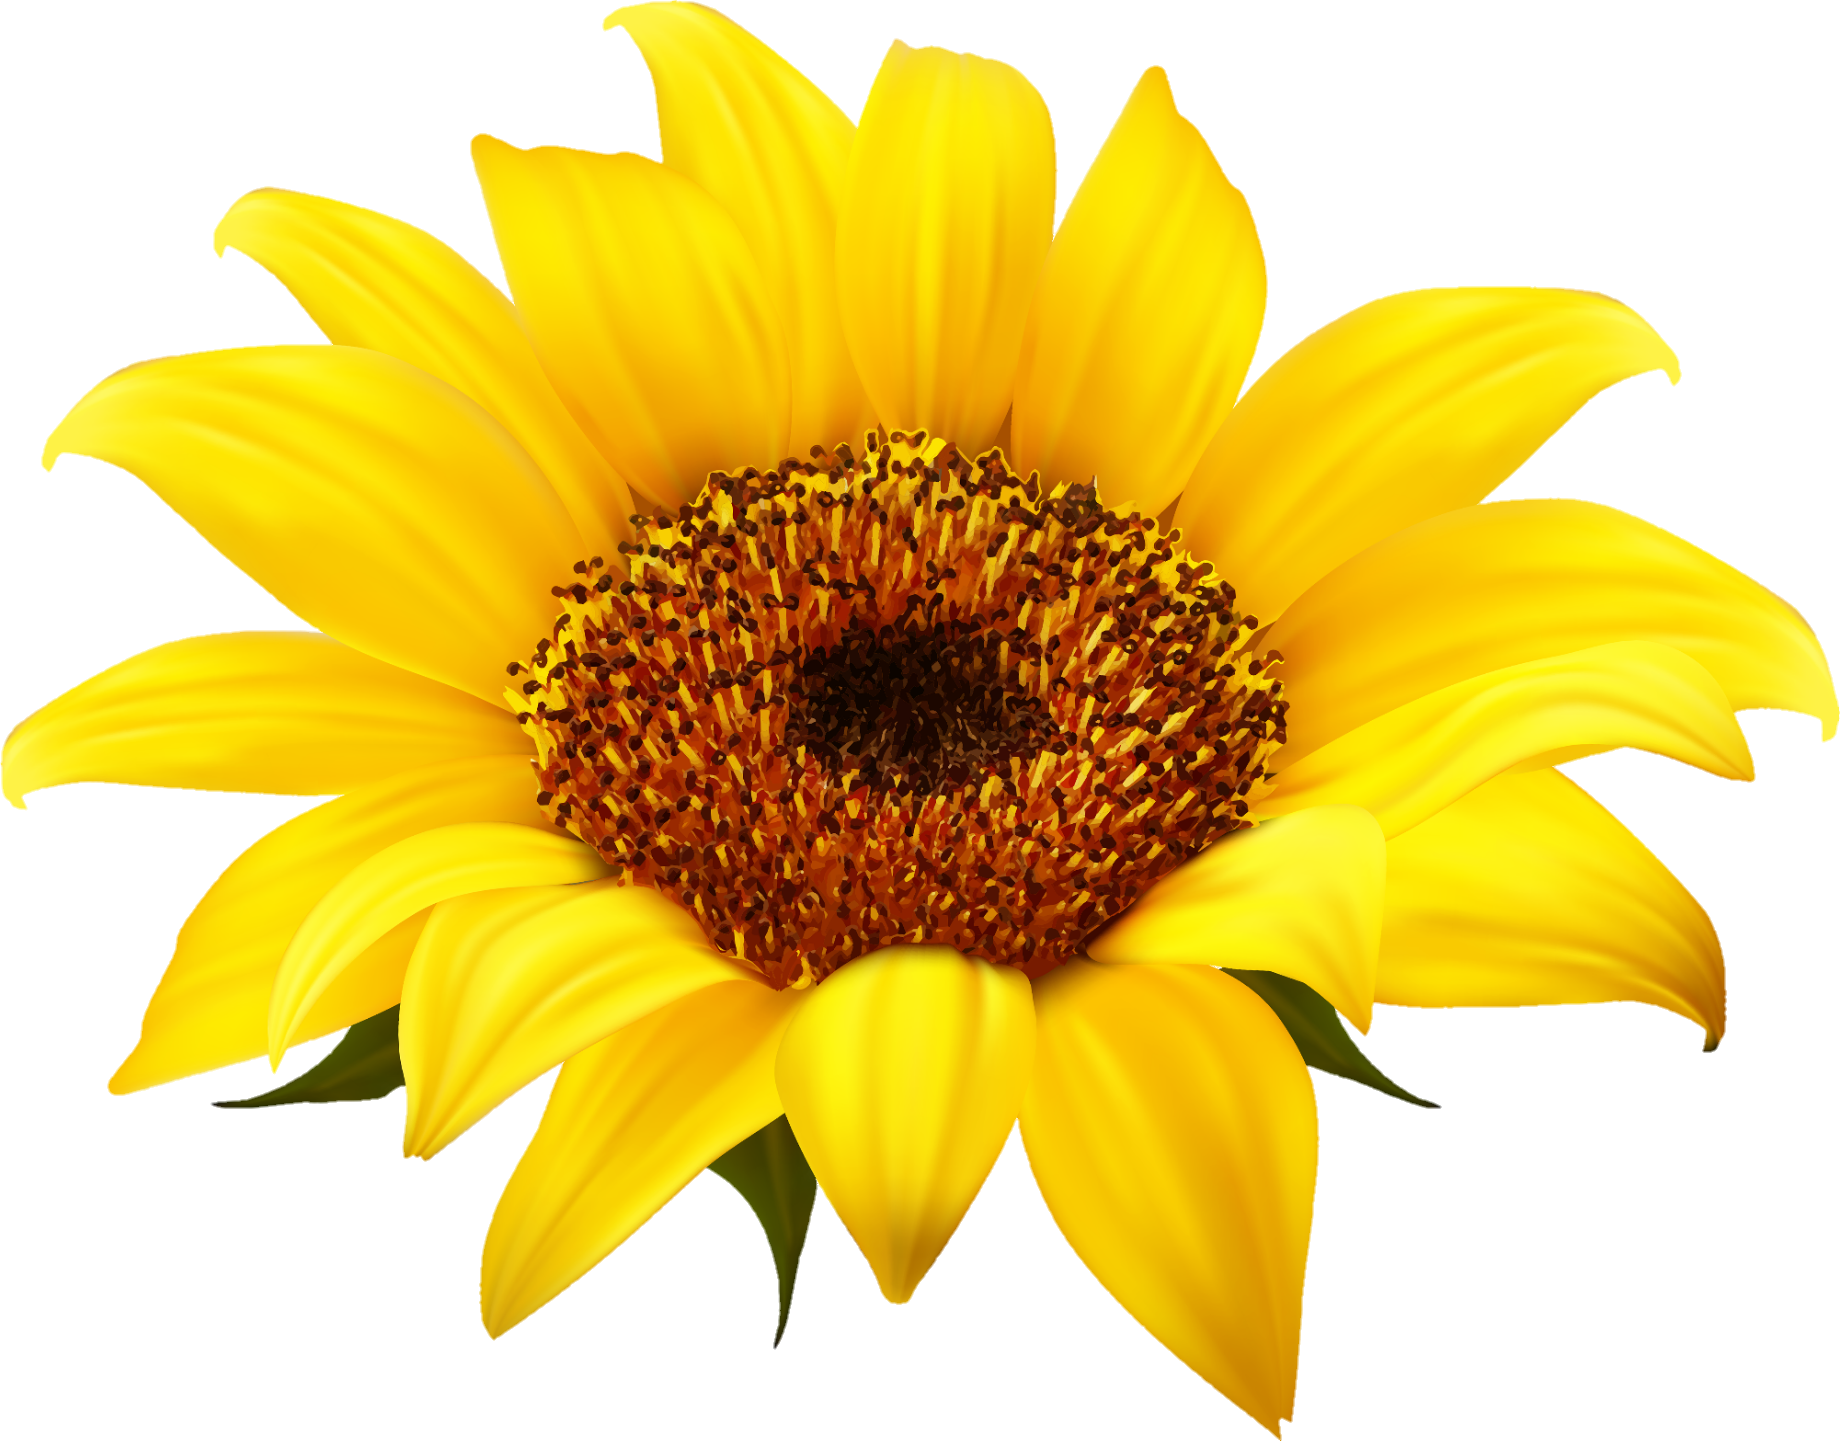 sunflower-png-image-from-pngfre-10